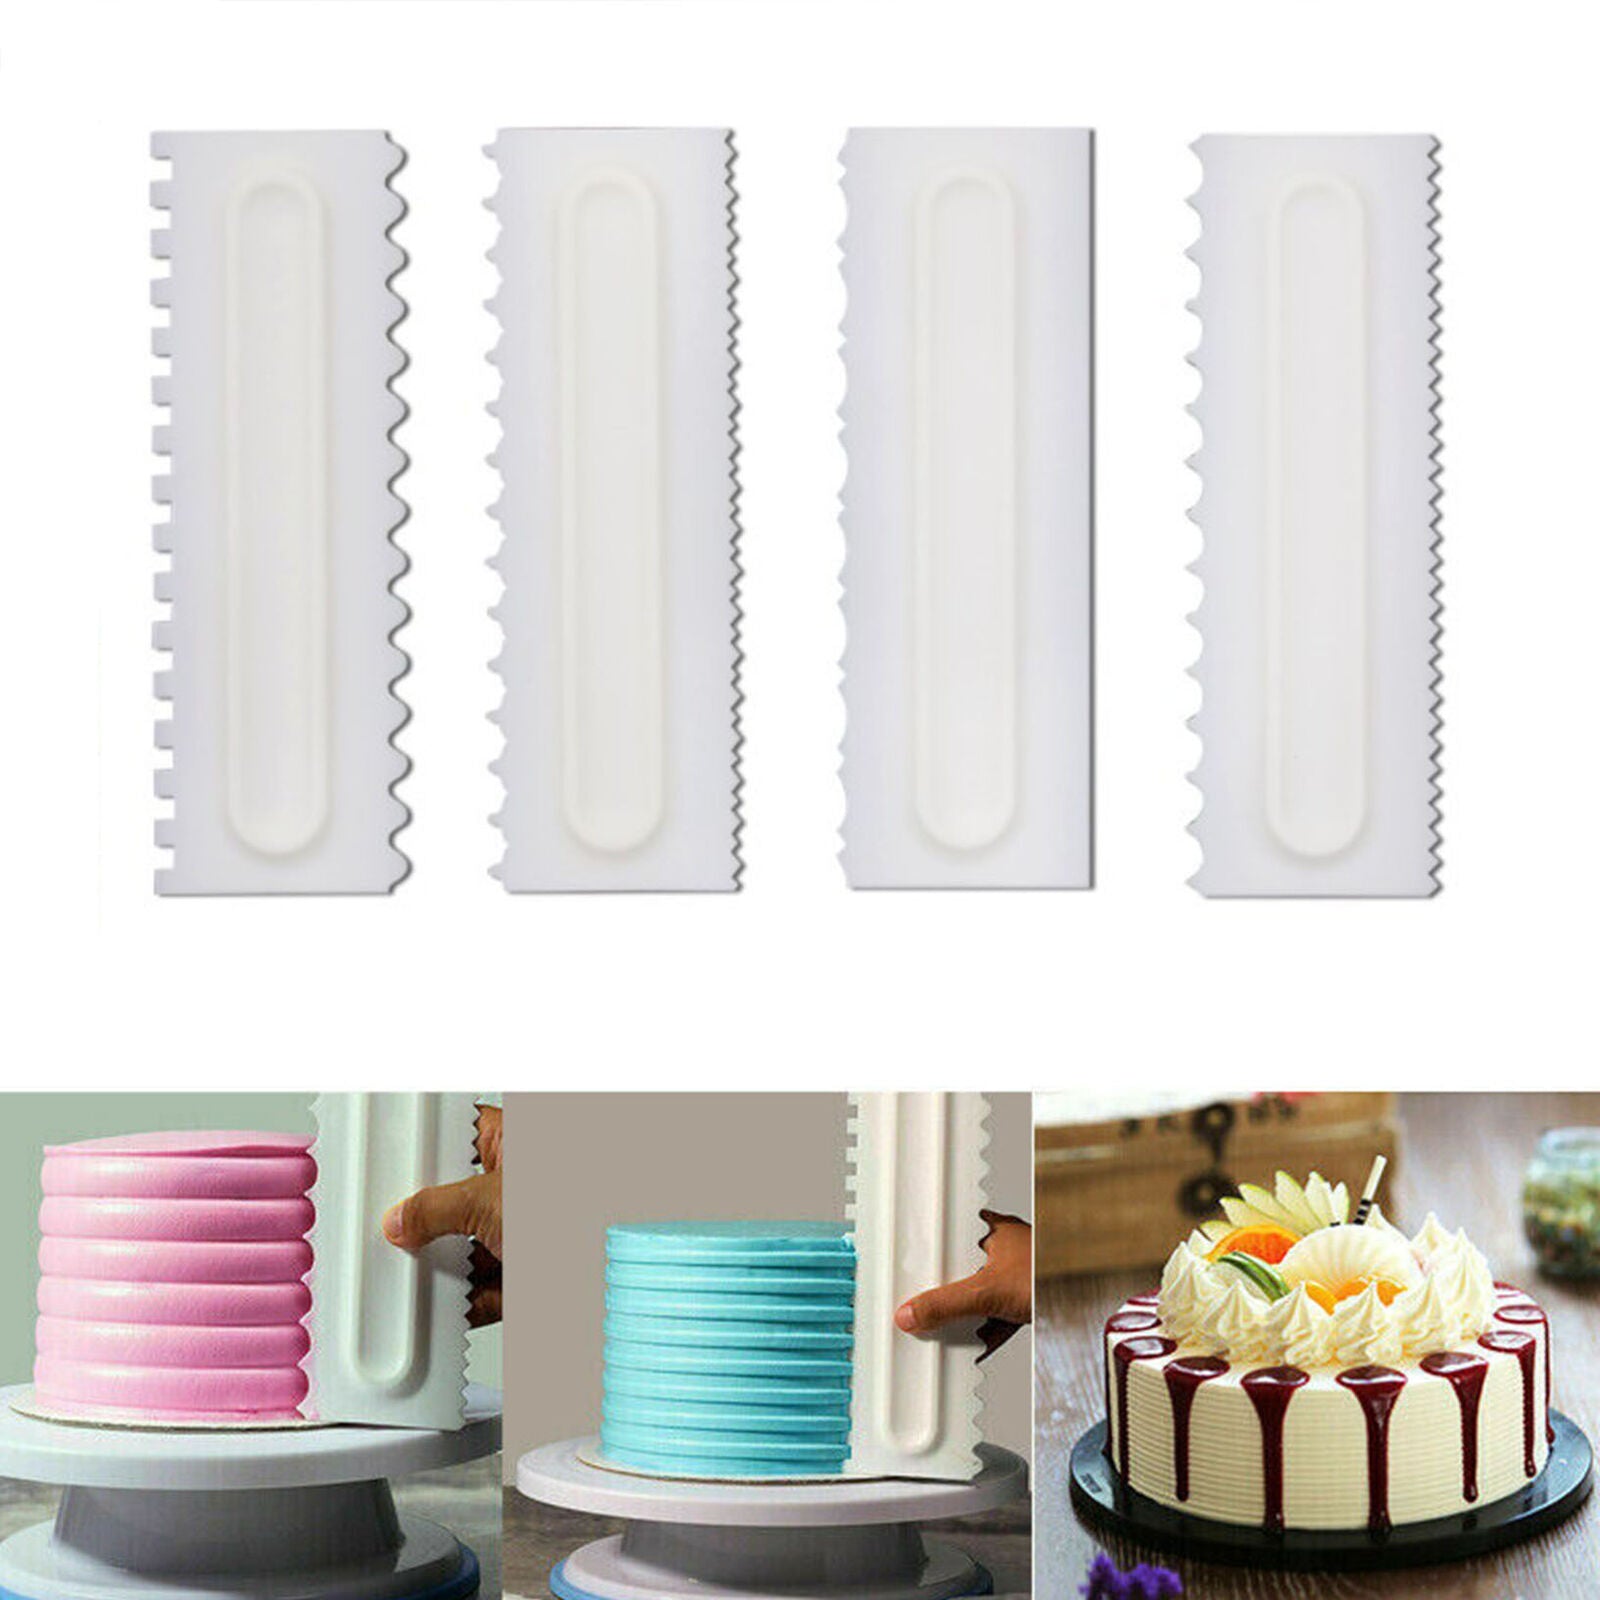 4 PCS Shapes Cake Decorating Comb Icing Smoother Cake Scraper Pastry Baking Tool